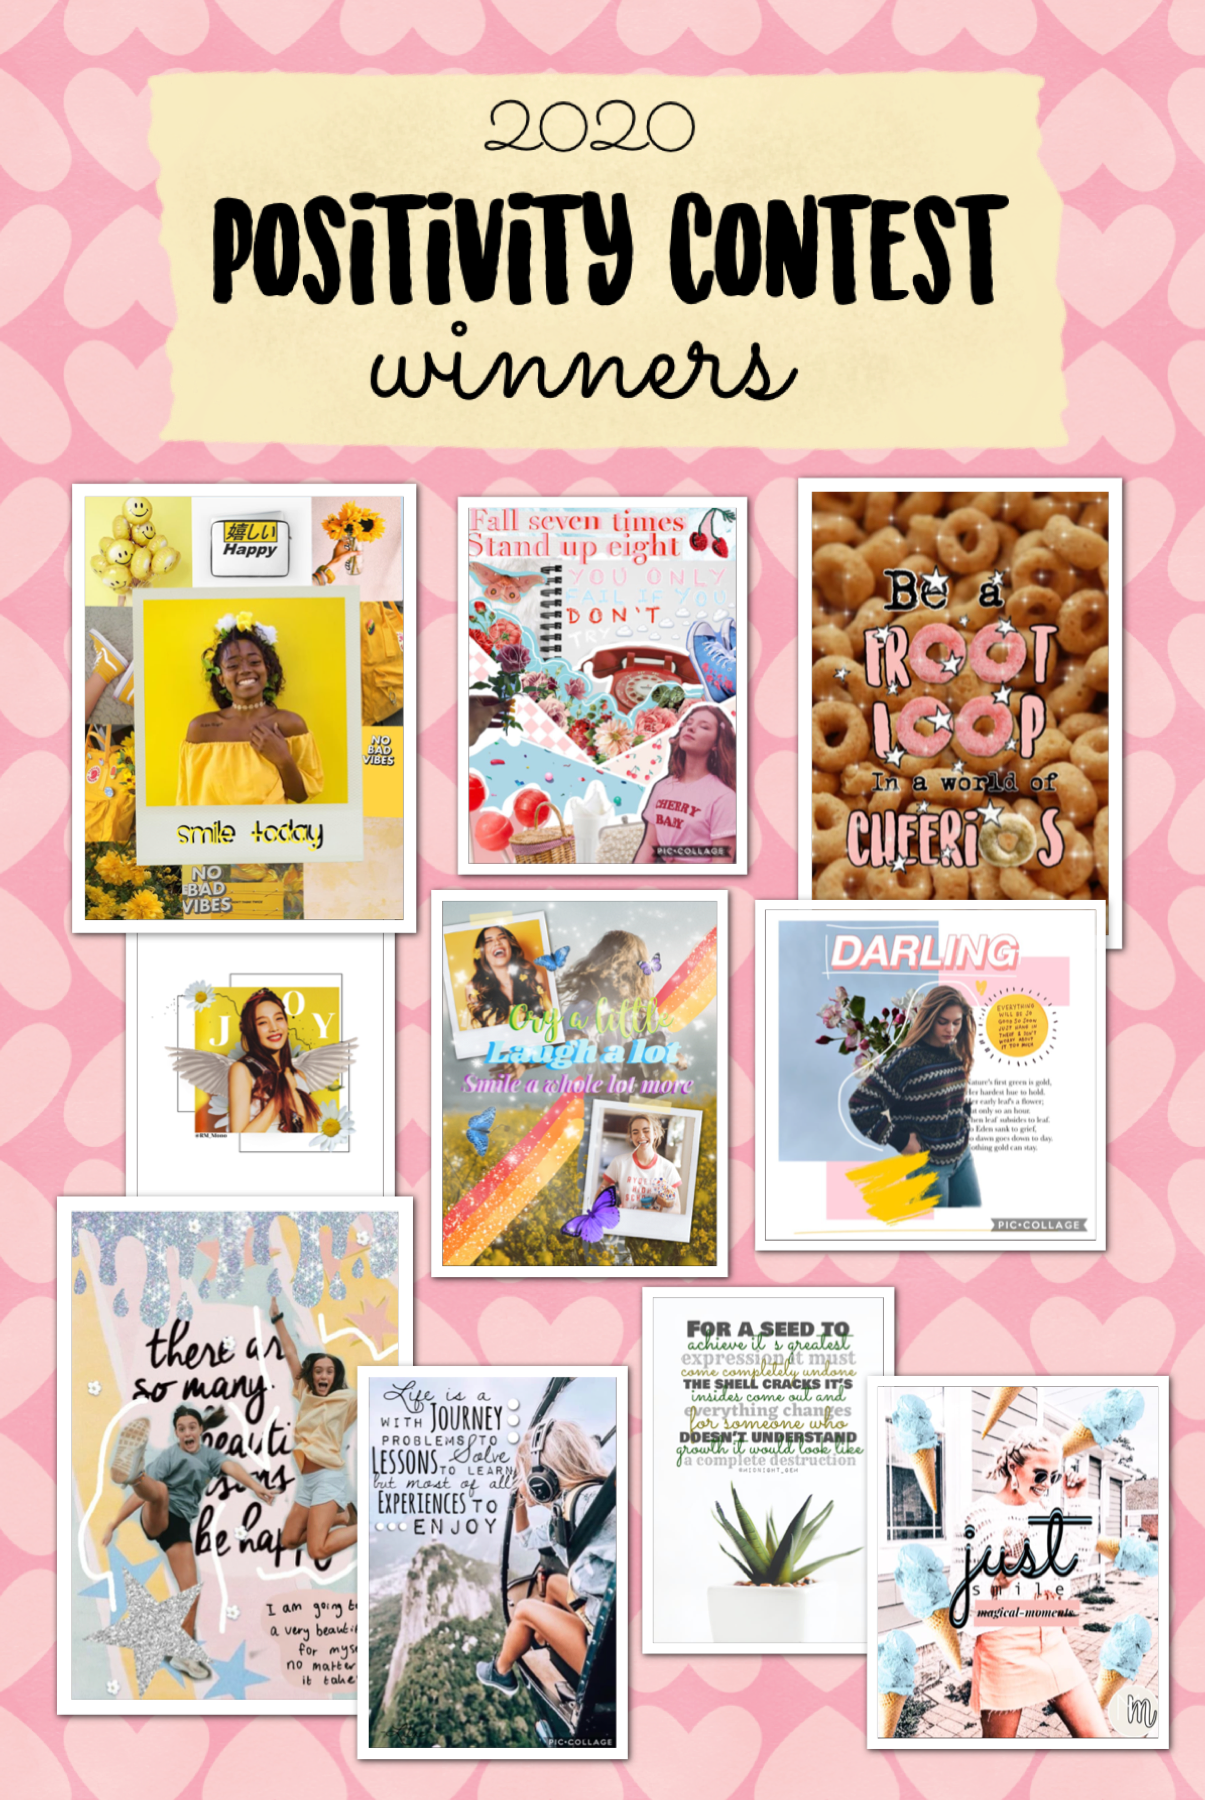 Winners are out. Thank you for your patience. Even w/o this contest, please continue to spread positivity 💖🥰